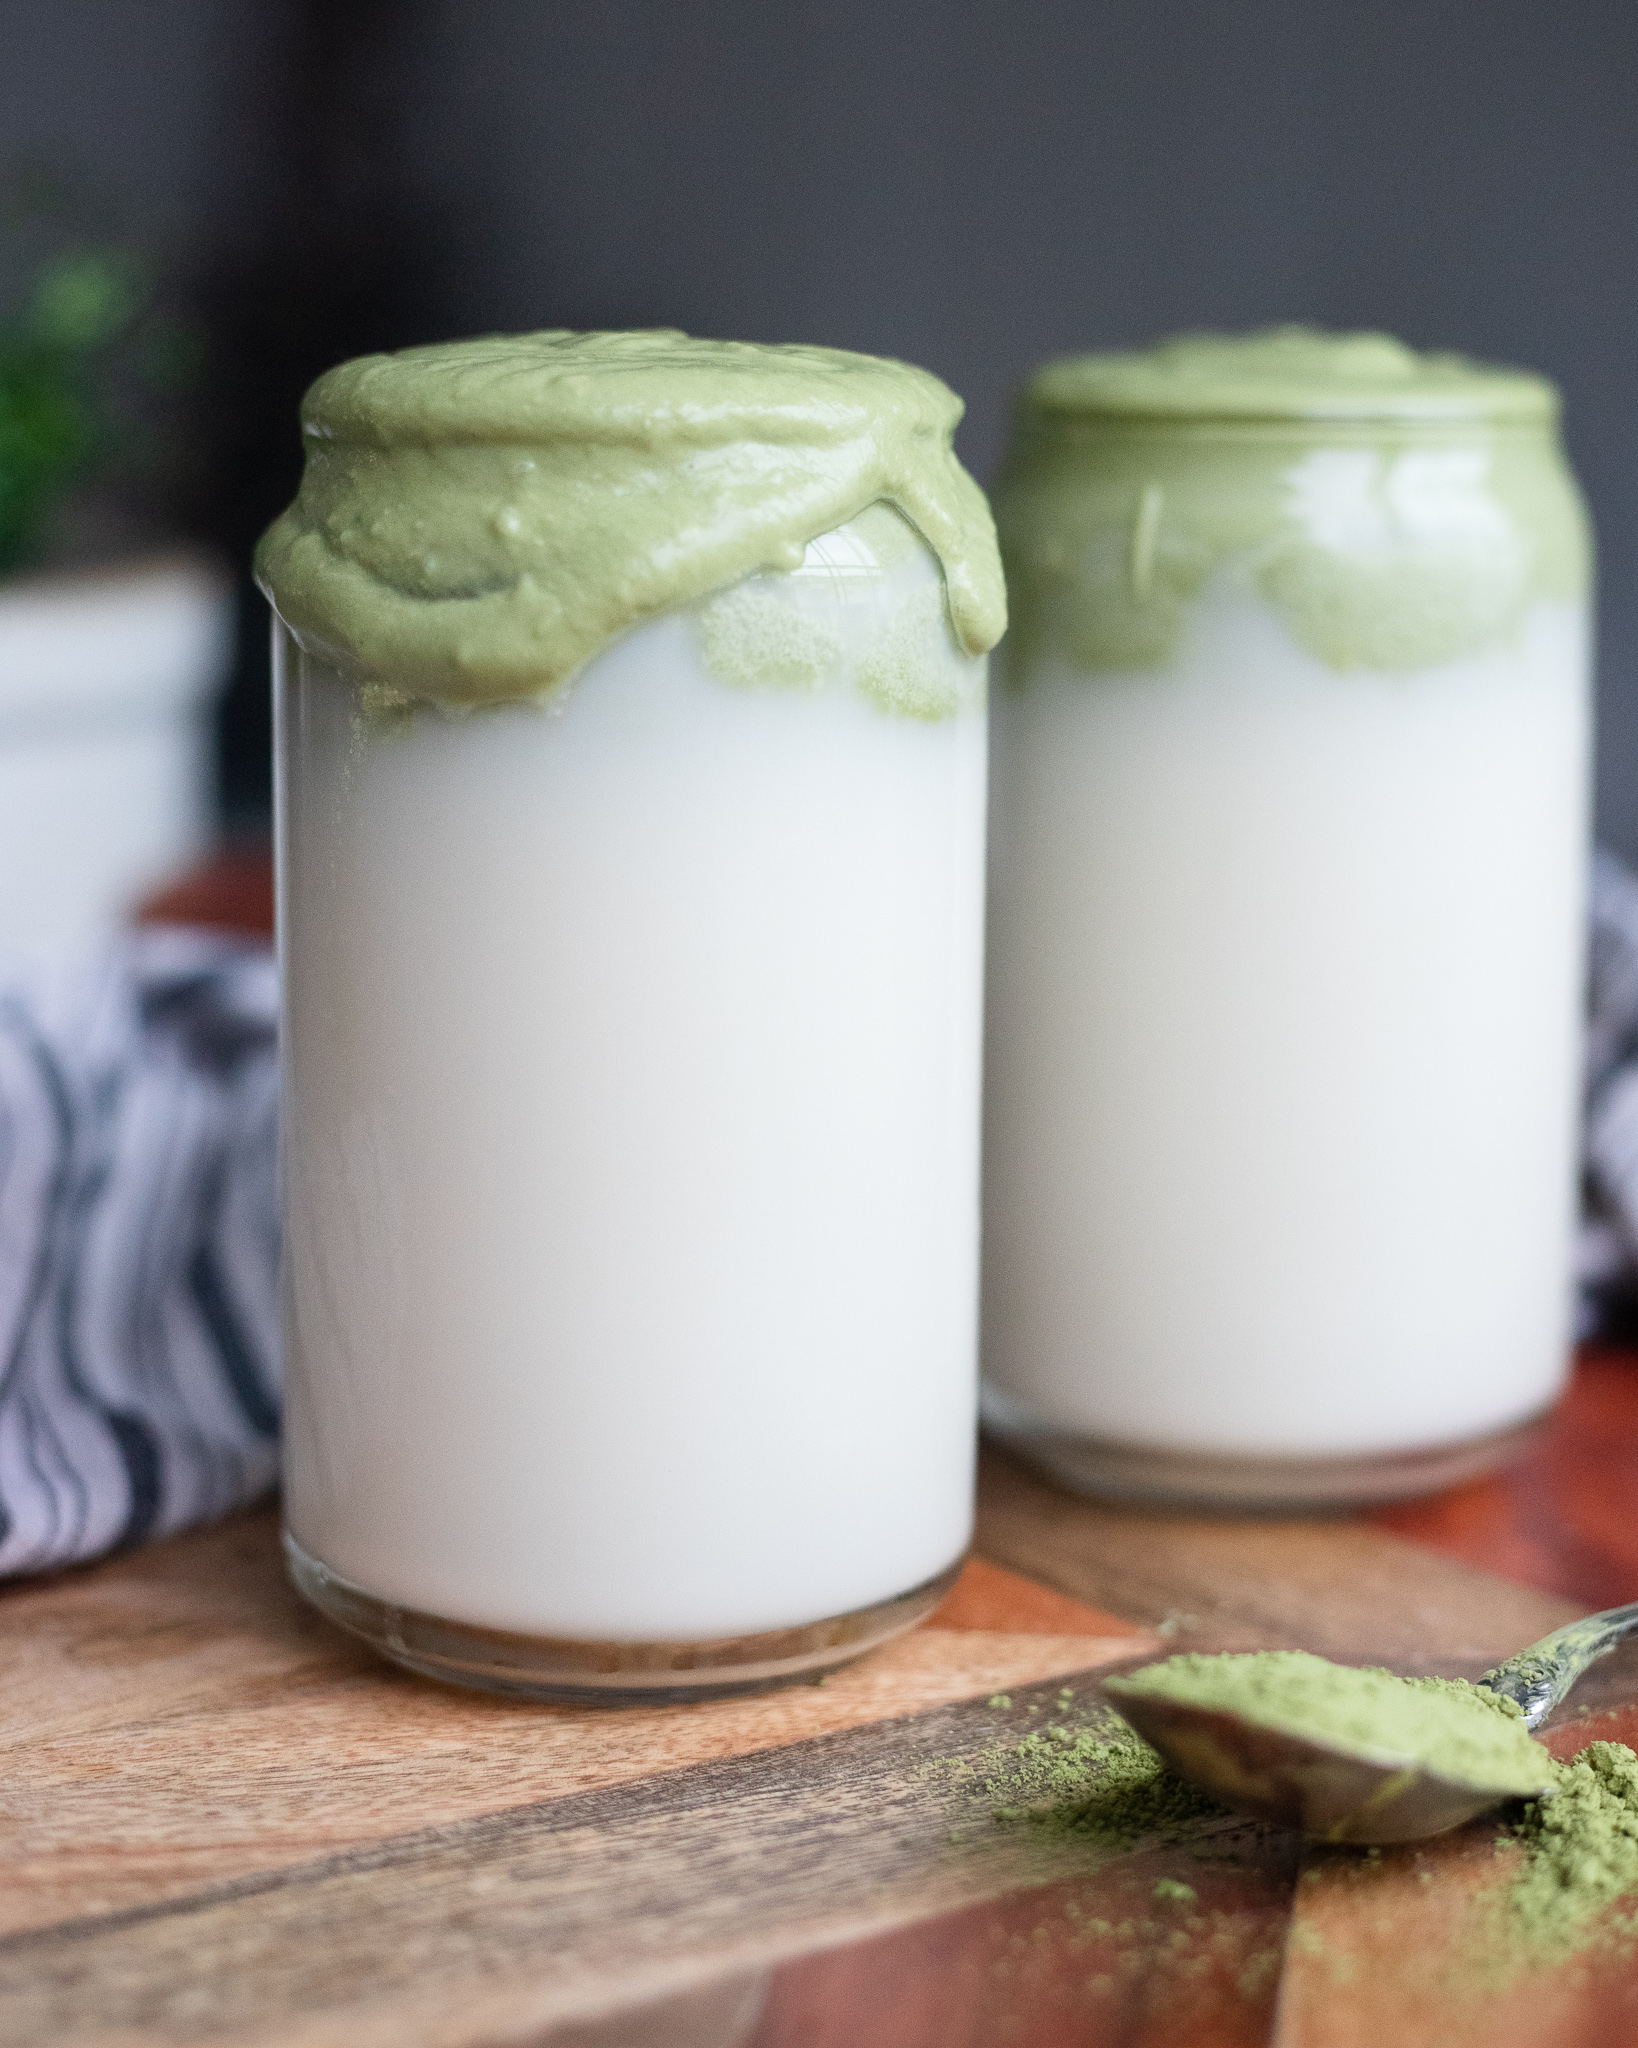 Two cups of milk topped with whipped matcha.